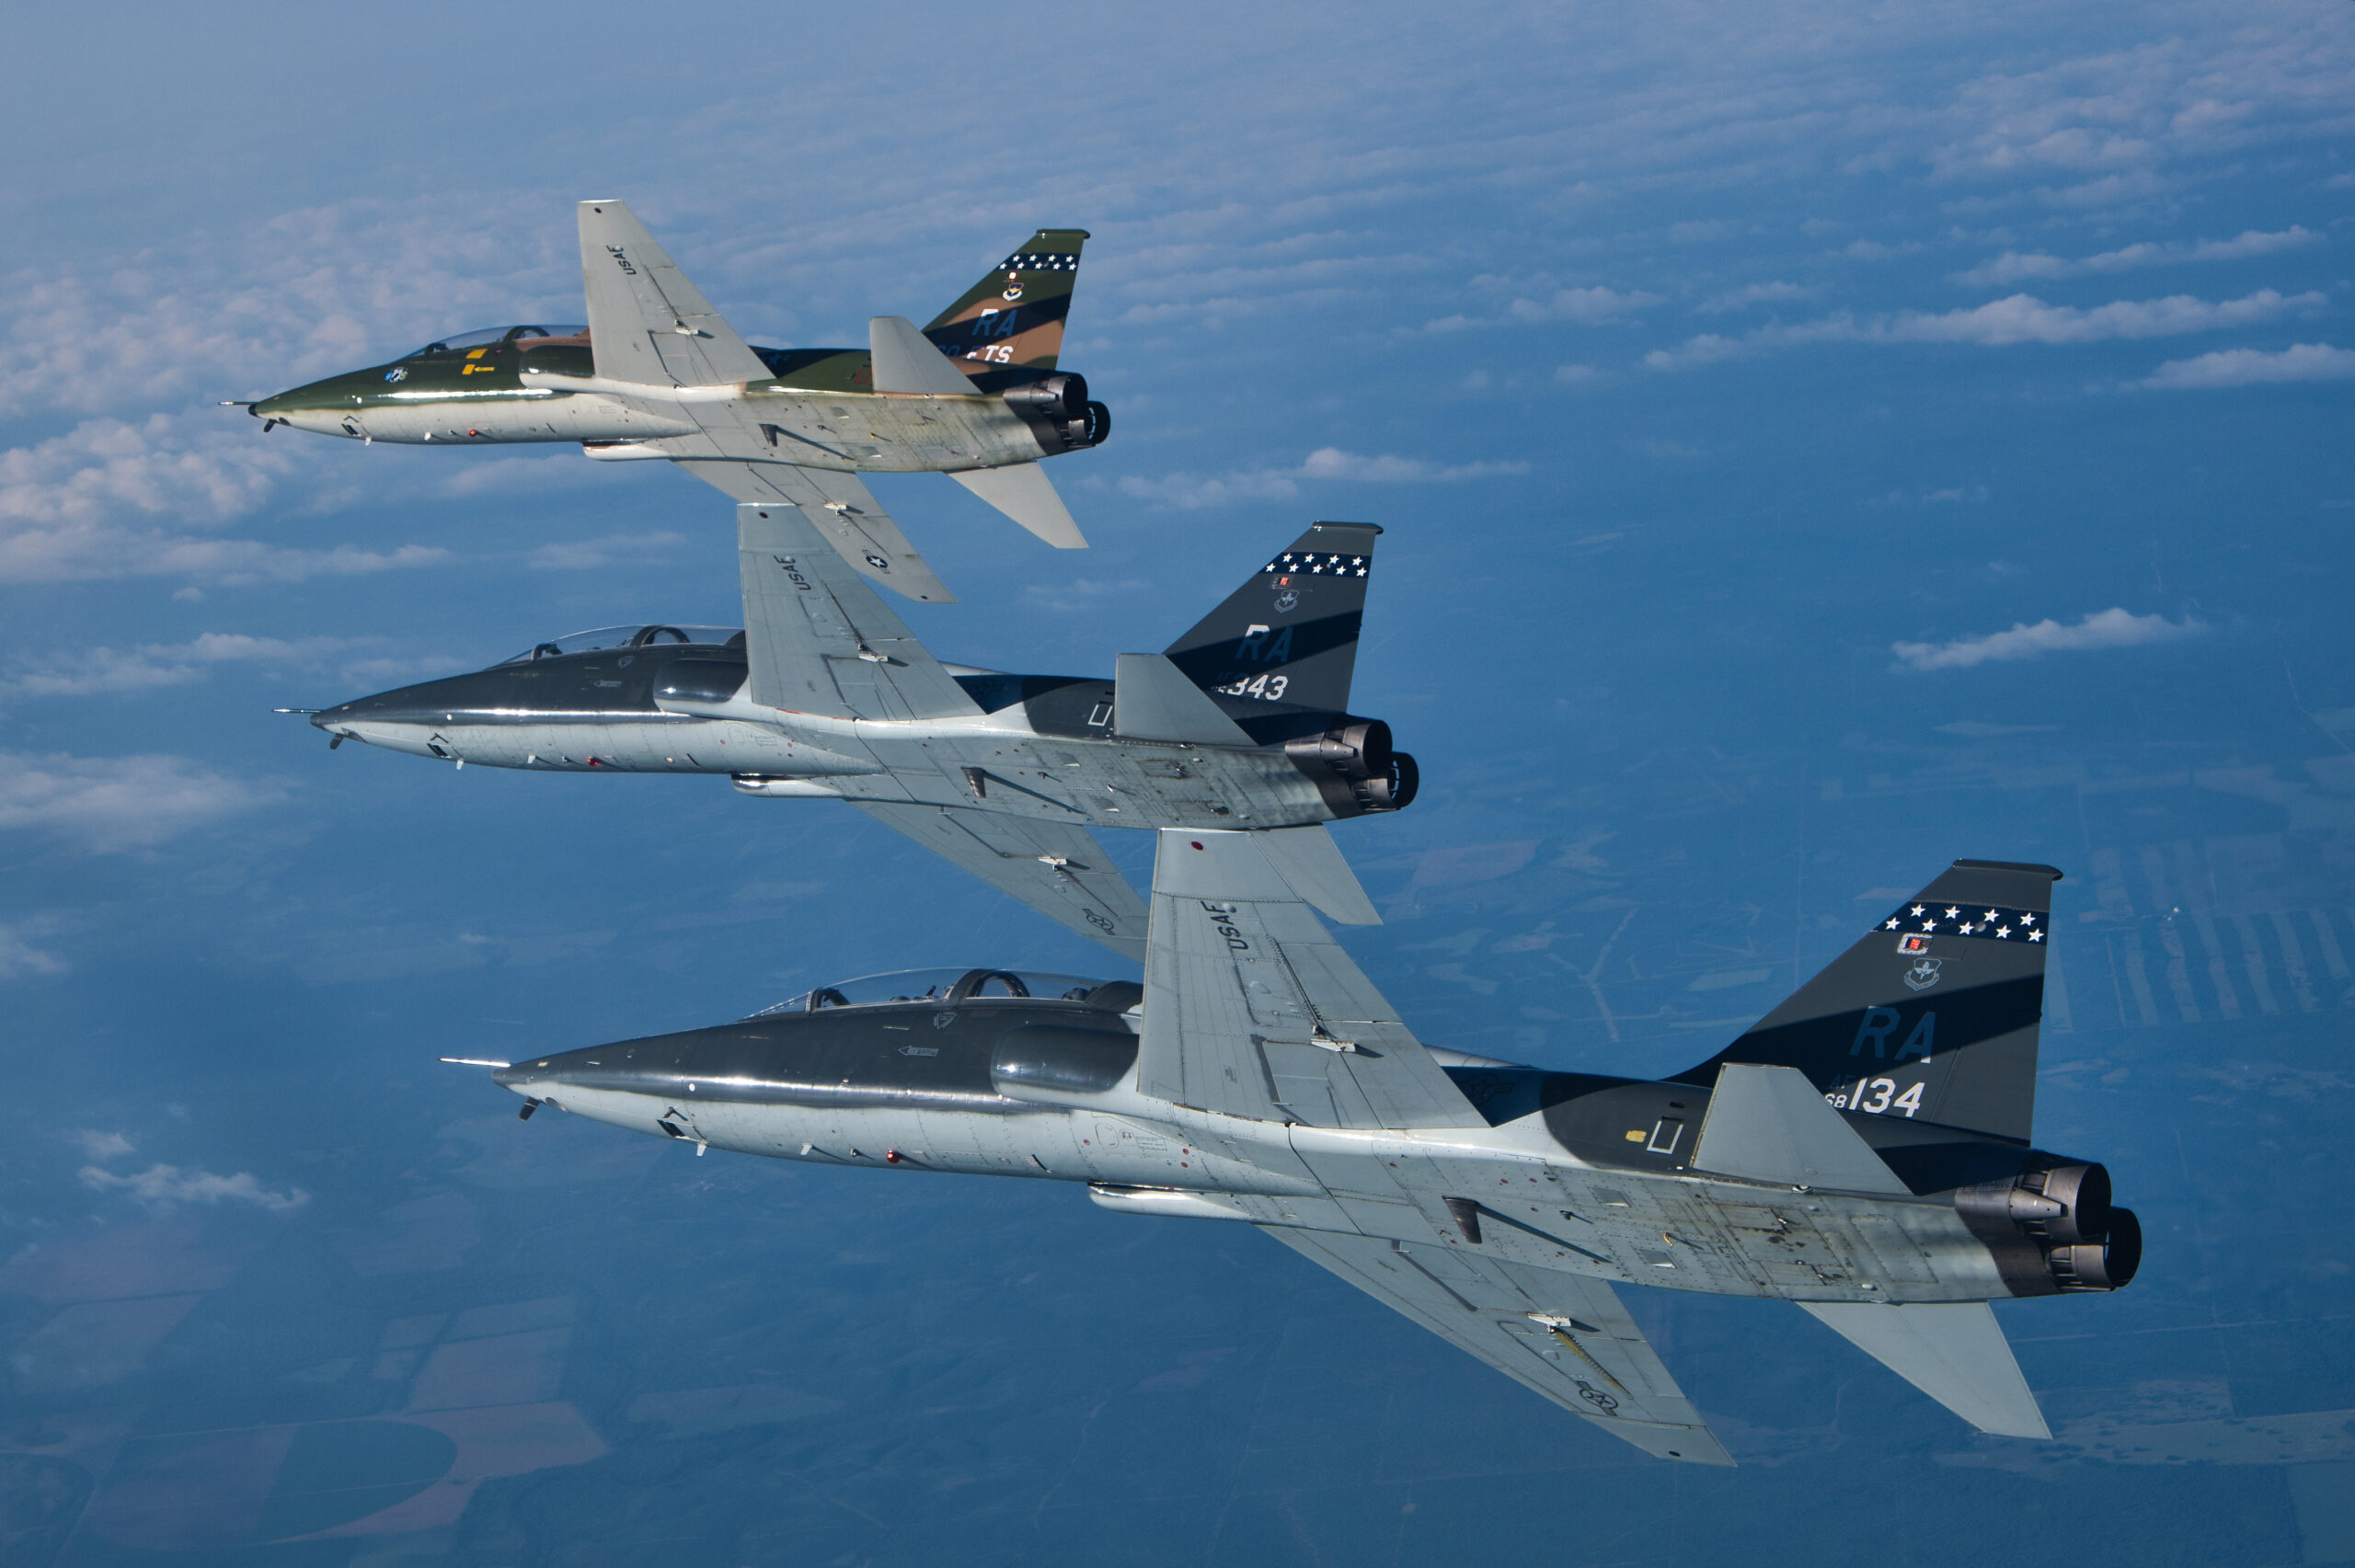 Pilots assigned to the 560th Flying Training Squadron fly in an echelon formation over a military operations area in T-38C Talon's from Joint Base San Antonio-Randolph, Texas, May 31, 2019. The 560th FTS uses the T-38C to teach students pilot instructor training and introduction to fighter fundamentals. (U.S. Air Force photo by MSgt Christopher Boitz)